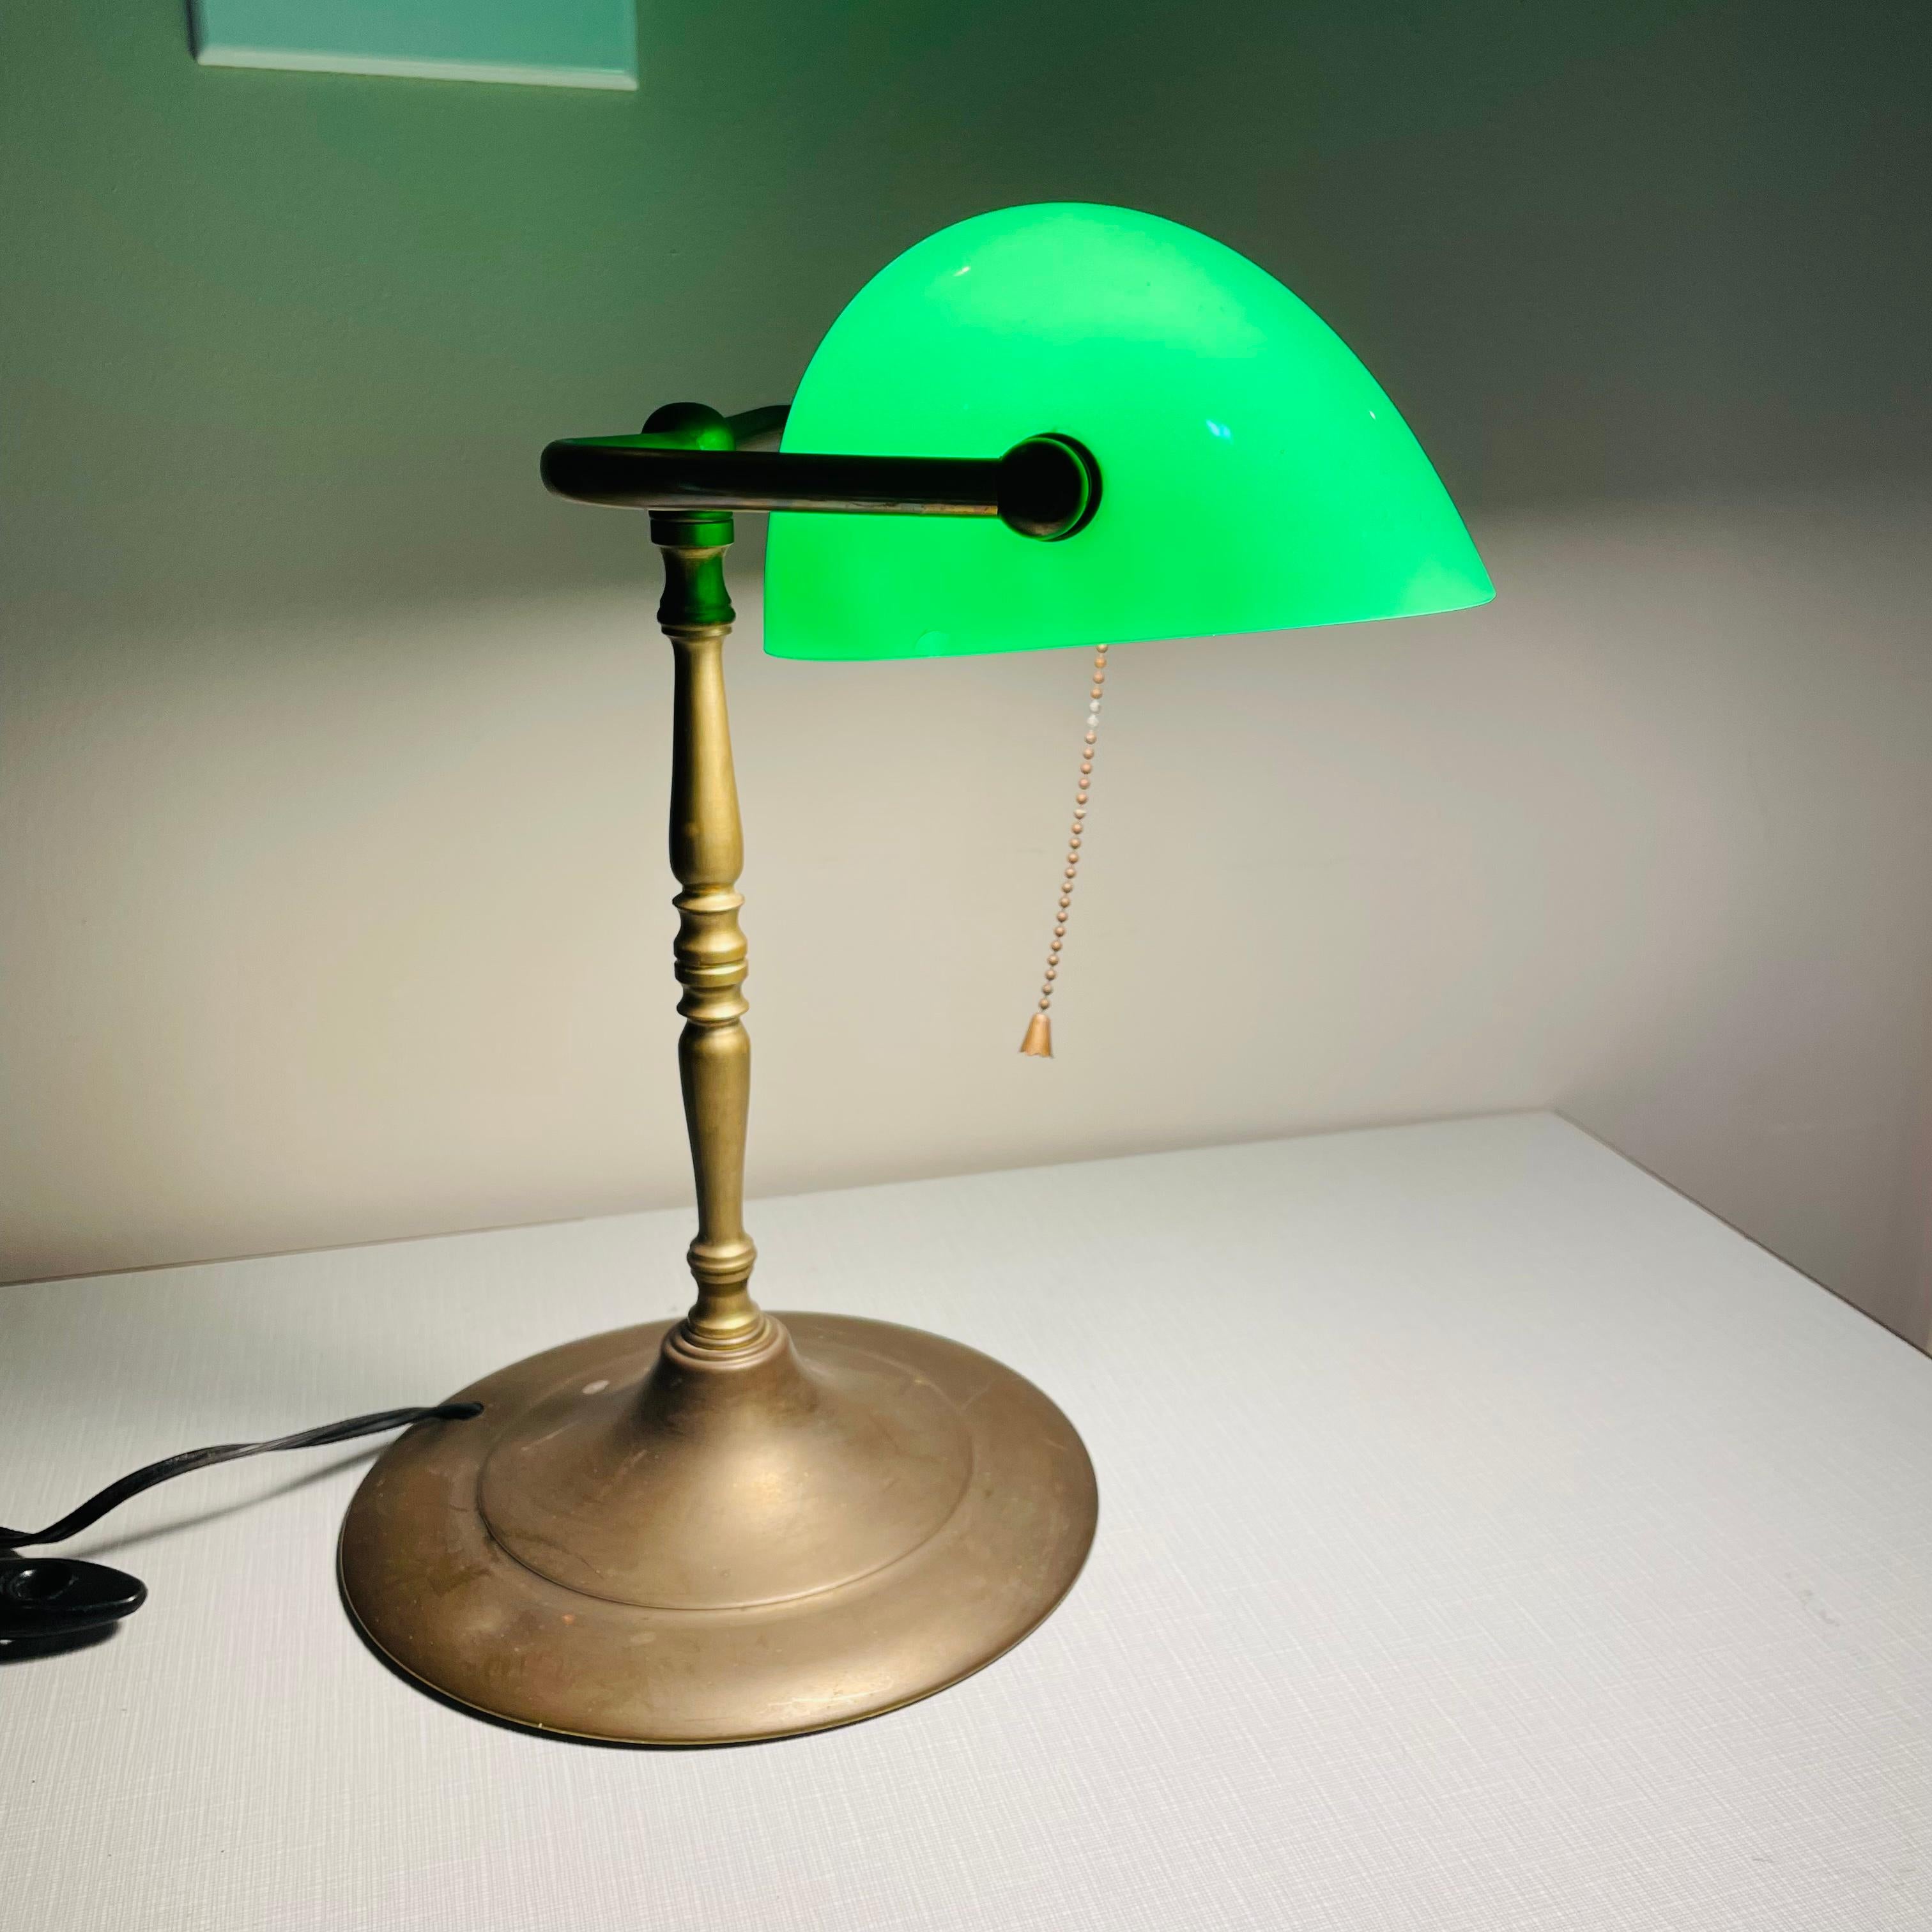 Vintage Art Deco Banker lamp with a green glass shade and brass base and arm. The lamp has newer wiring, and uses a standard light bulb. Perfect for a hall table or one's desk. Classic and timeless style. The shade articulates to adjust the amount